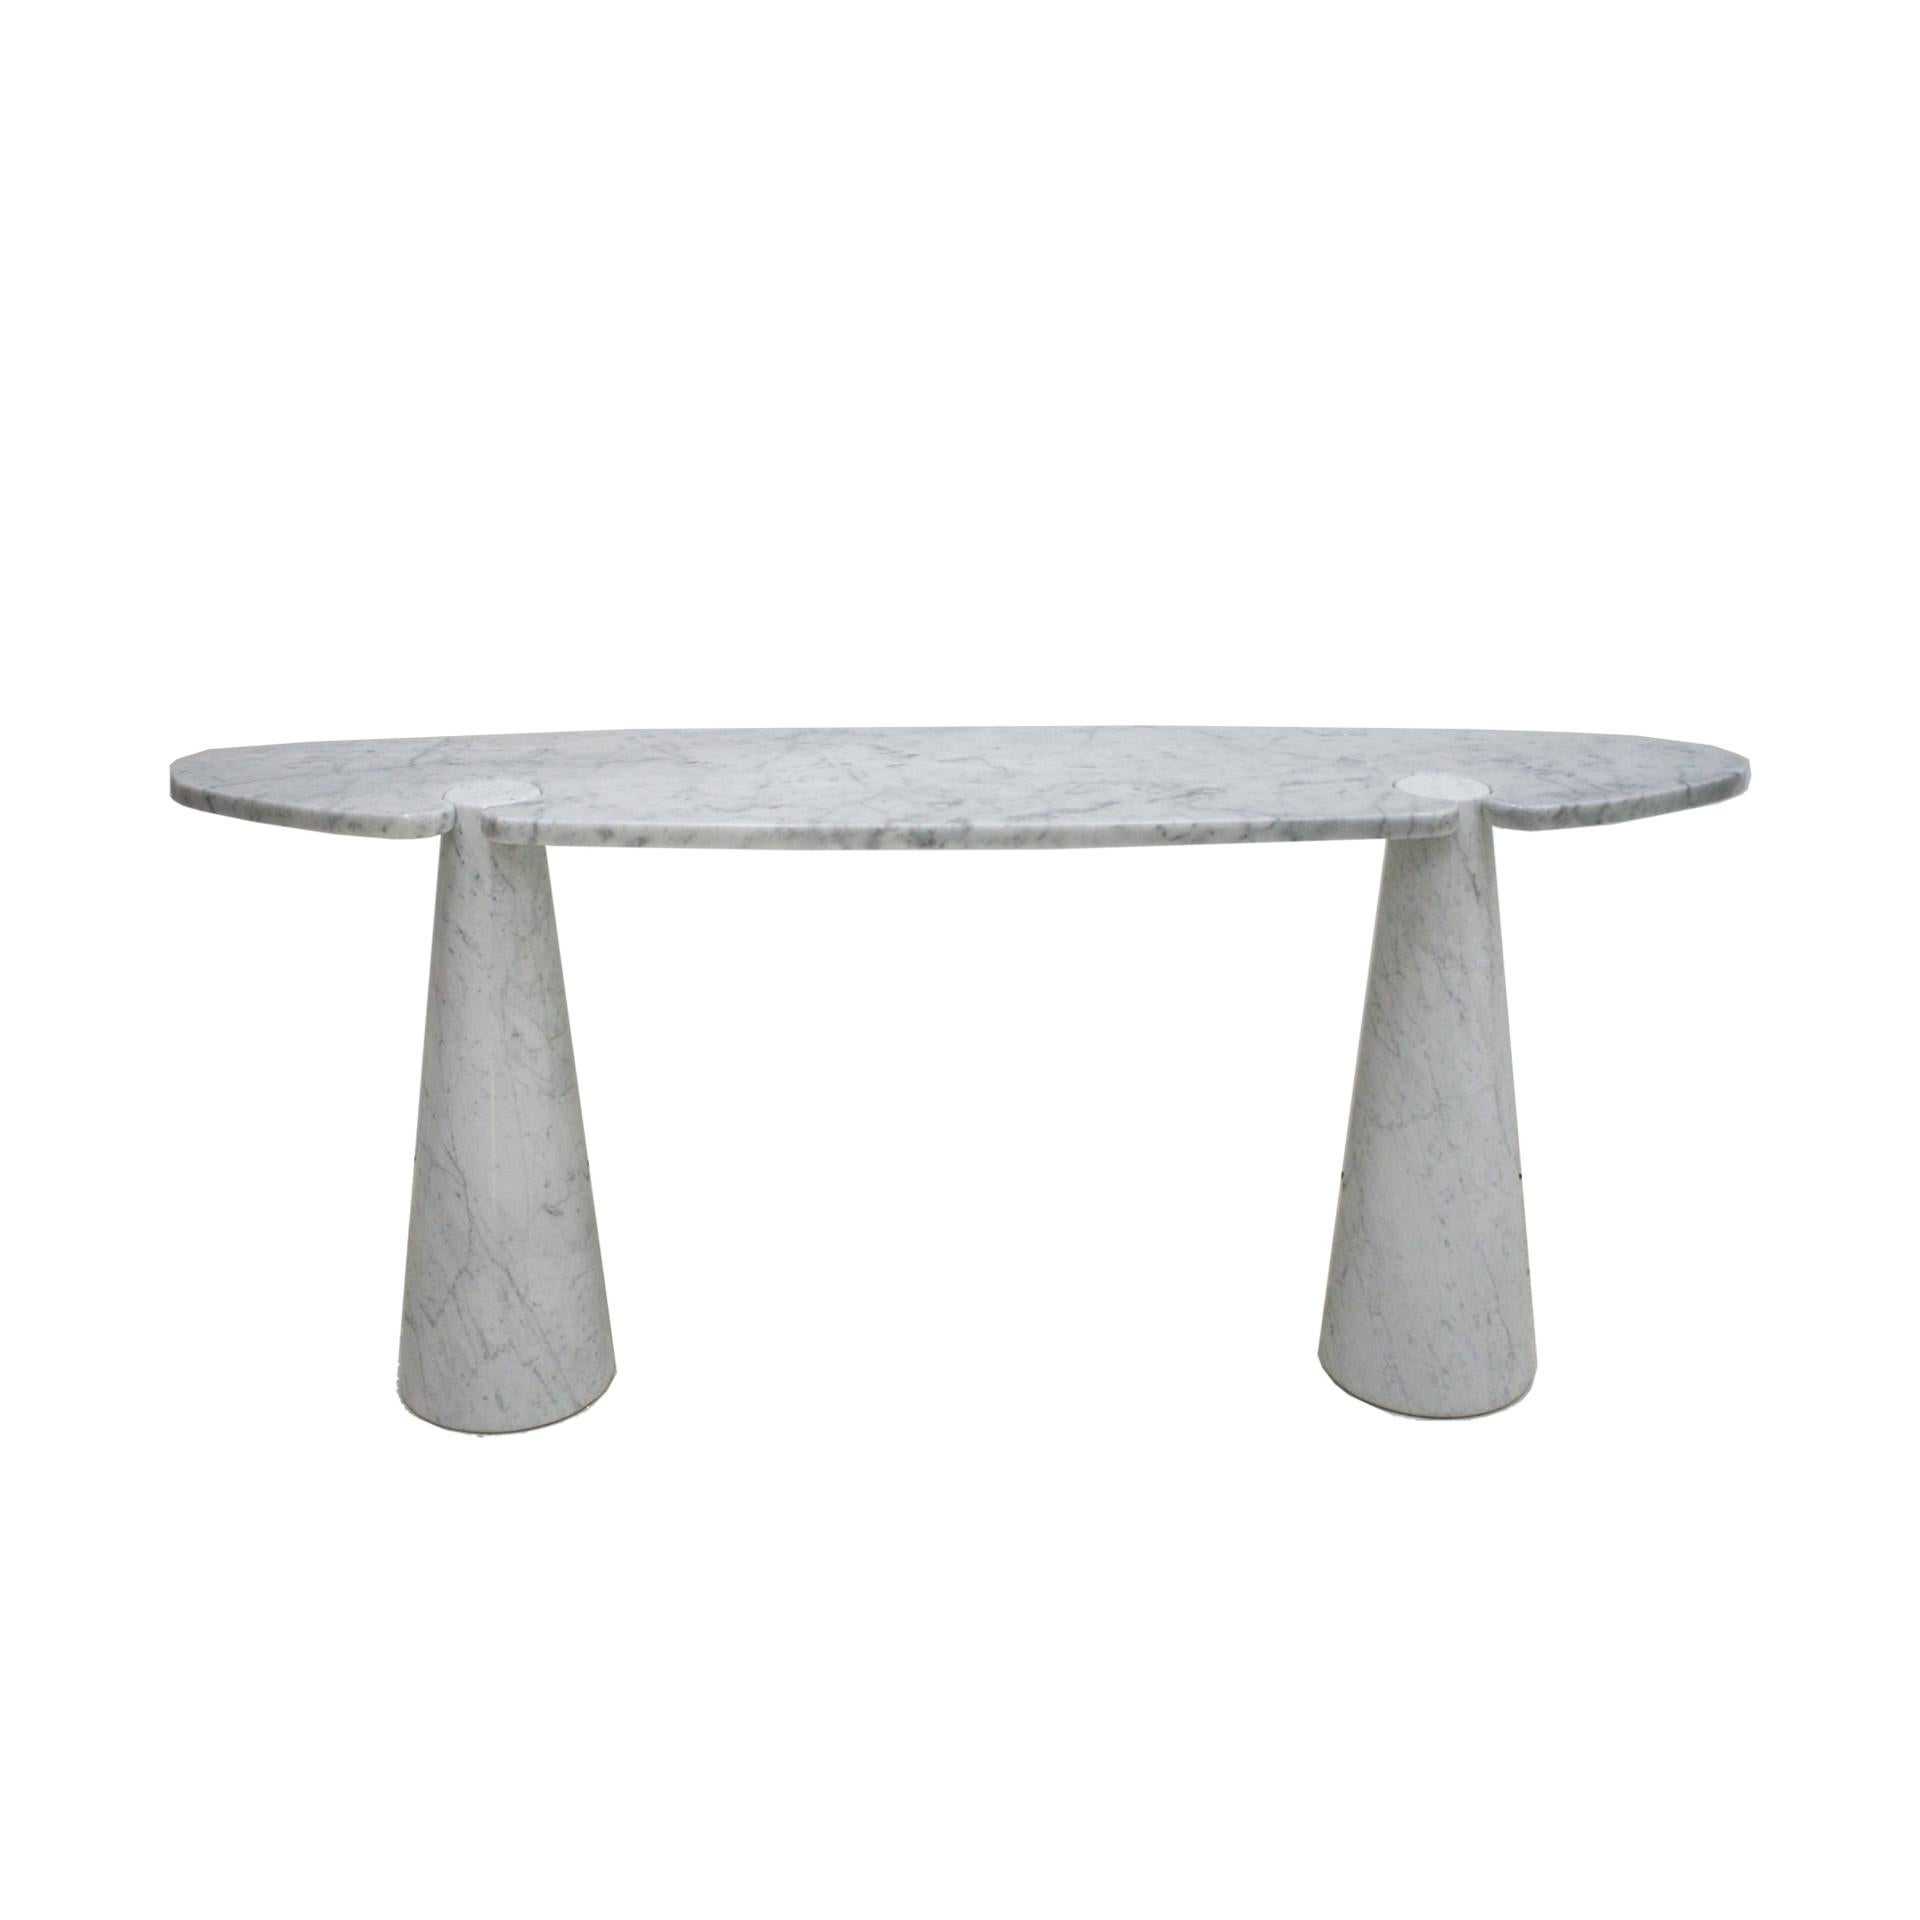 Console table designed by Angelo Mangiarotti composed of tabletop resting on two conical marble legs,1970s. Iconic and original design in Carrara marble. Excellent condition.

This piece is an example of the result of a gravity interlocking design